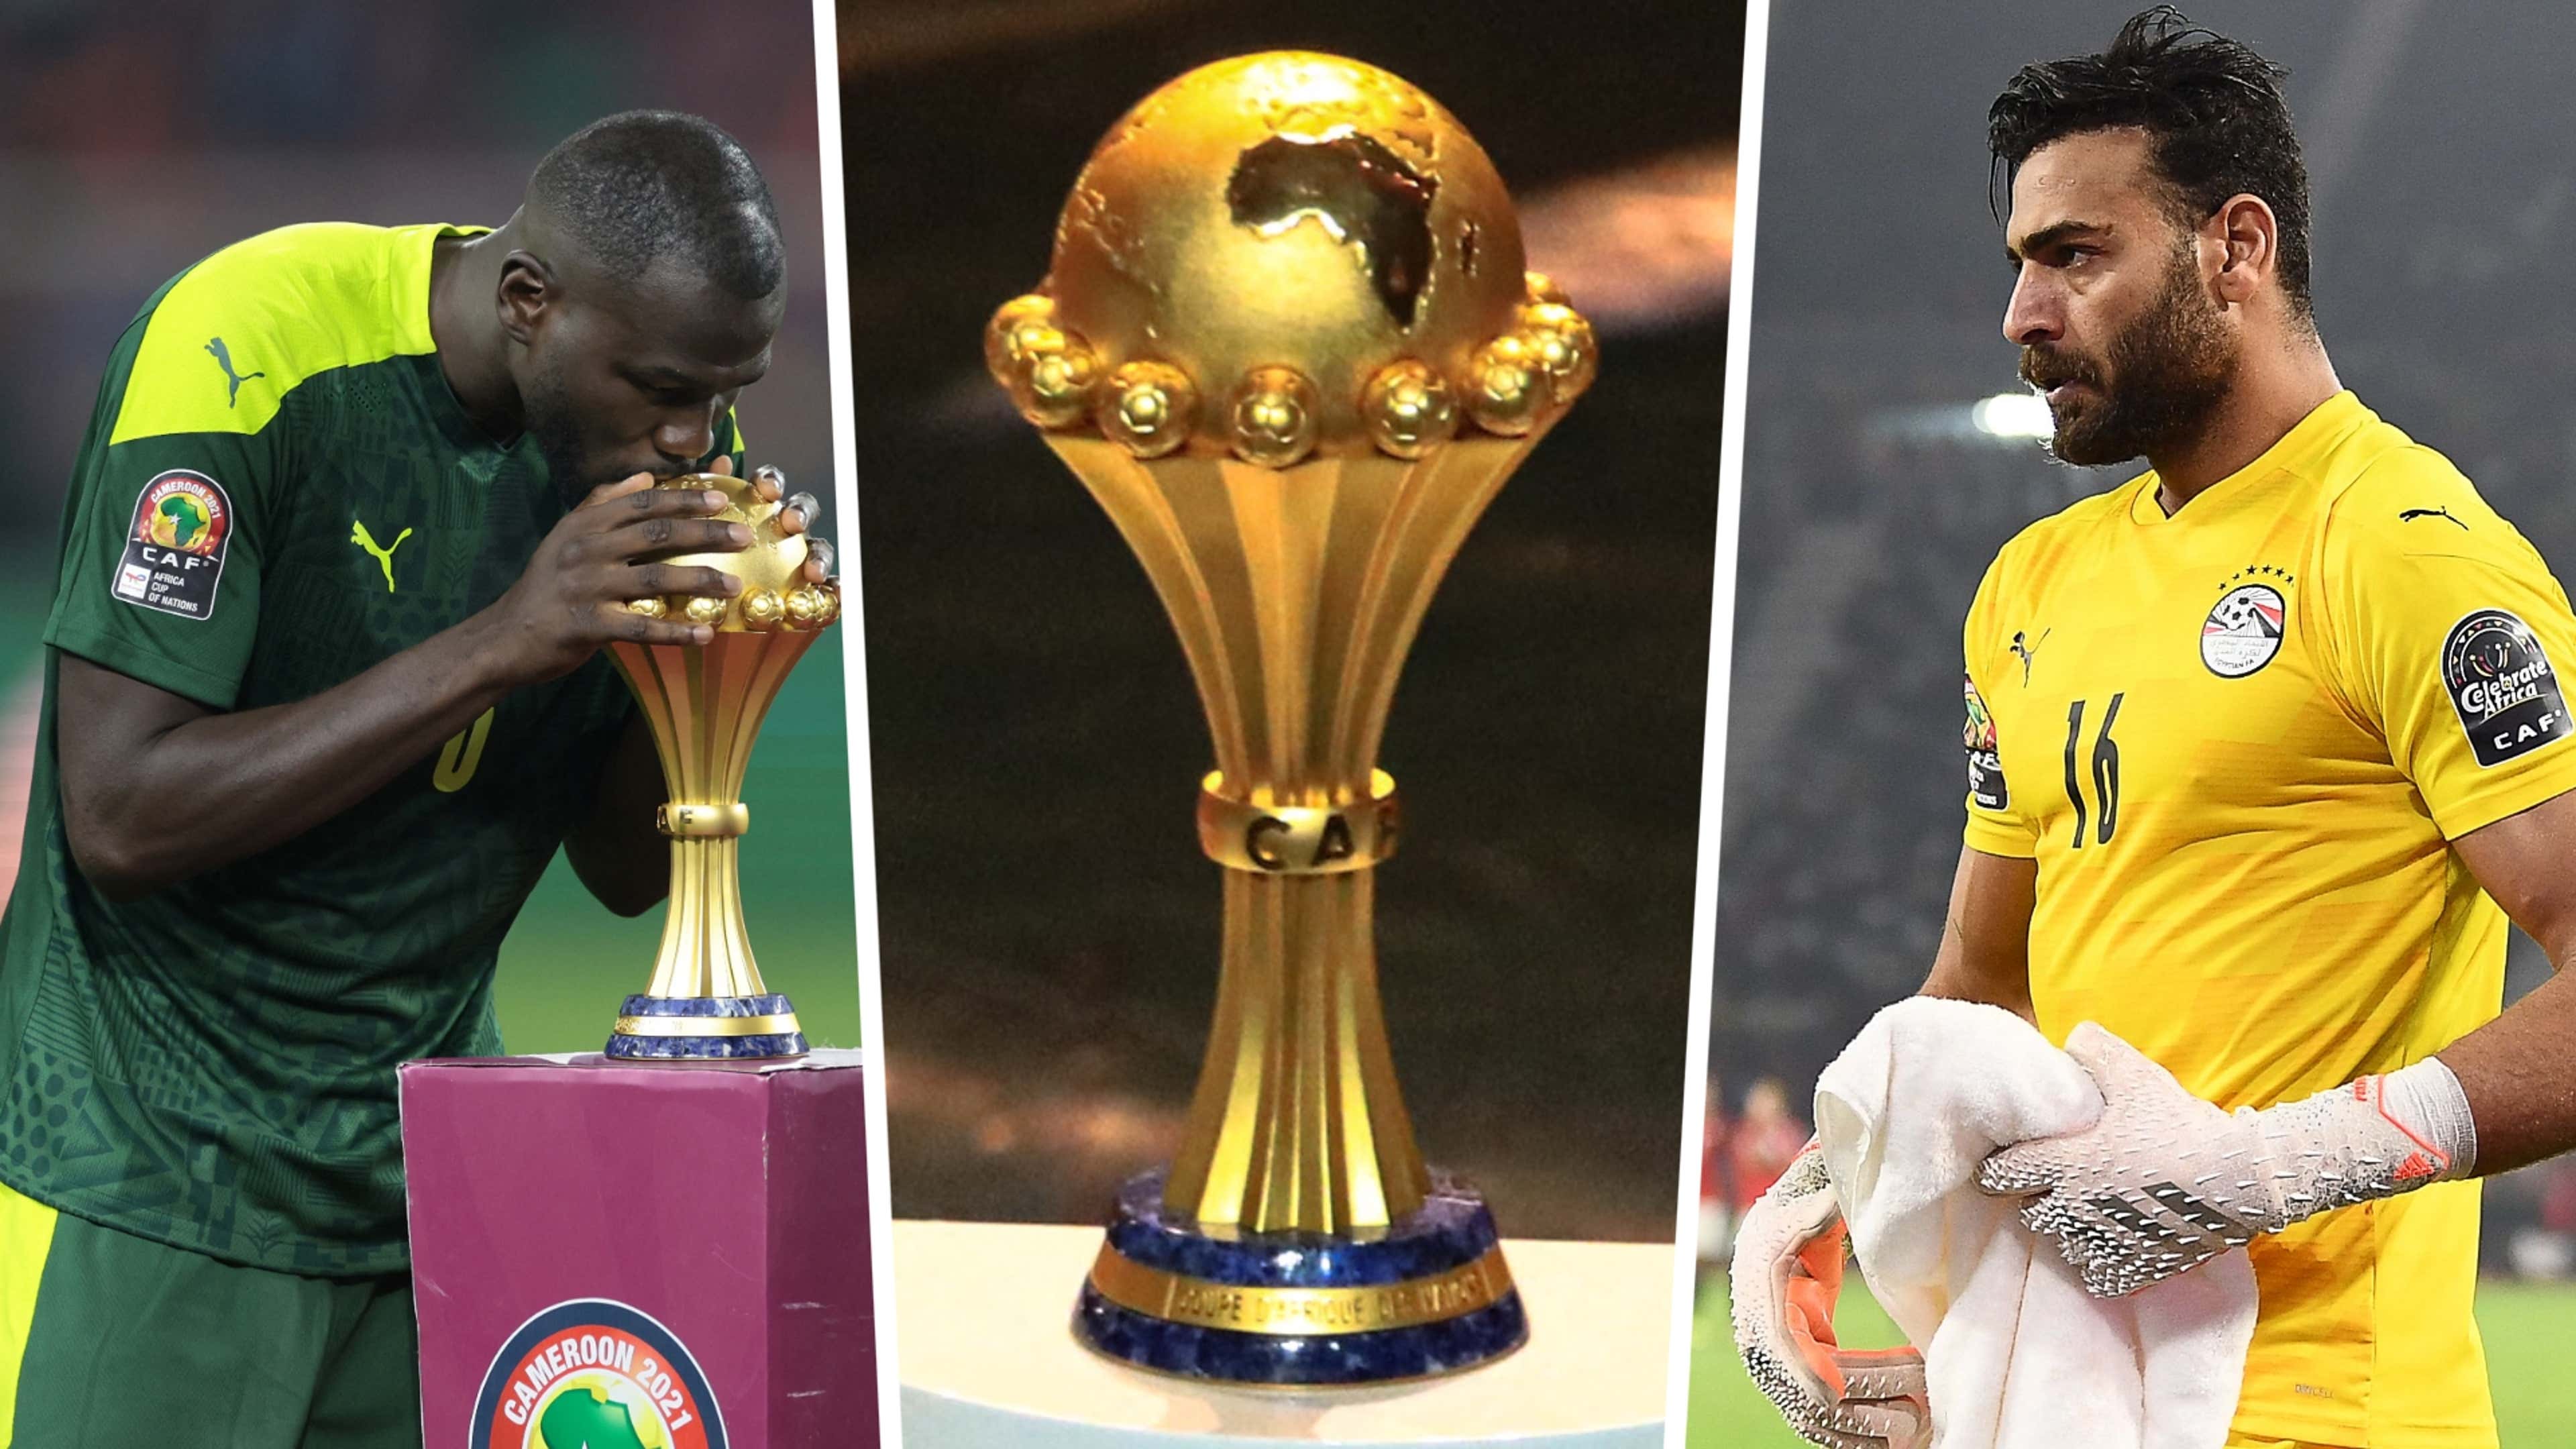 Kalidou Koulibaly, Africa Cup of Nations, Mohamed Abou Gabal